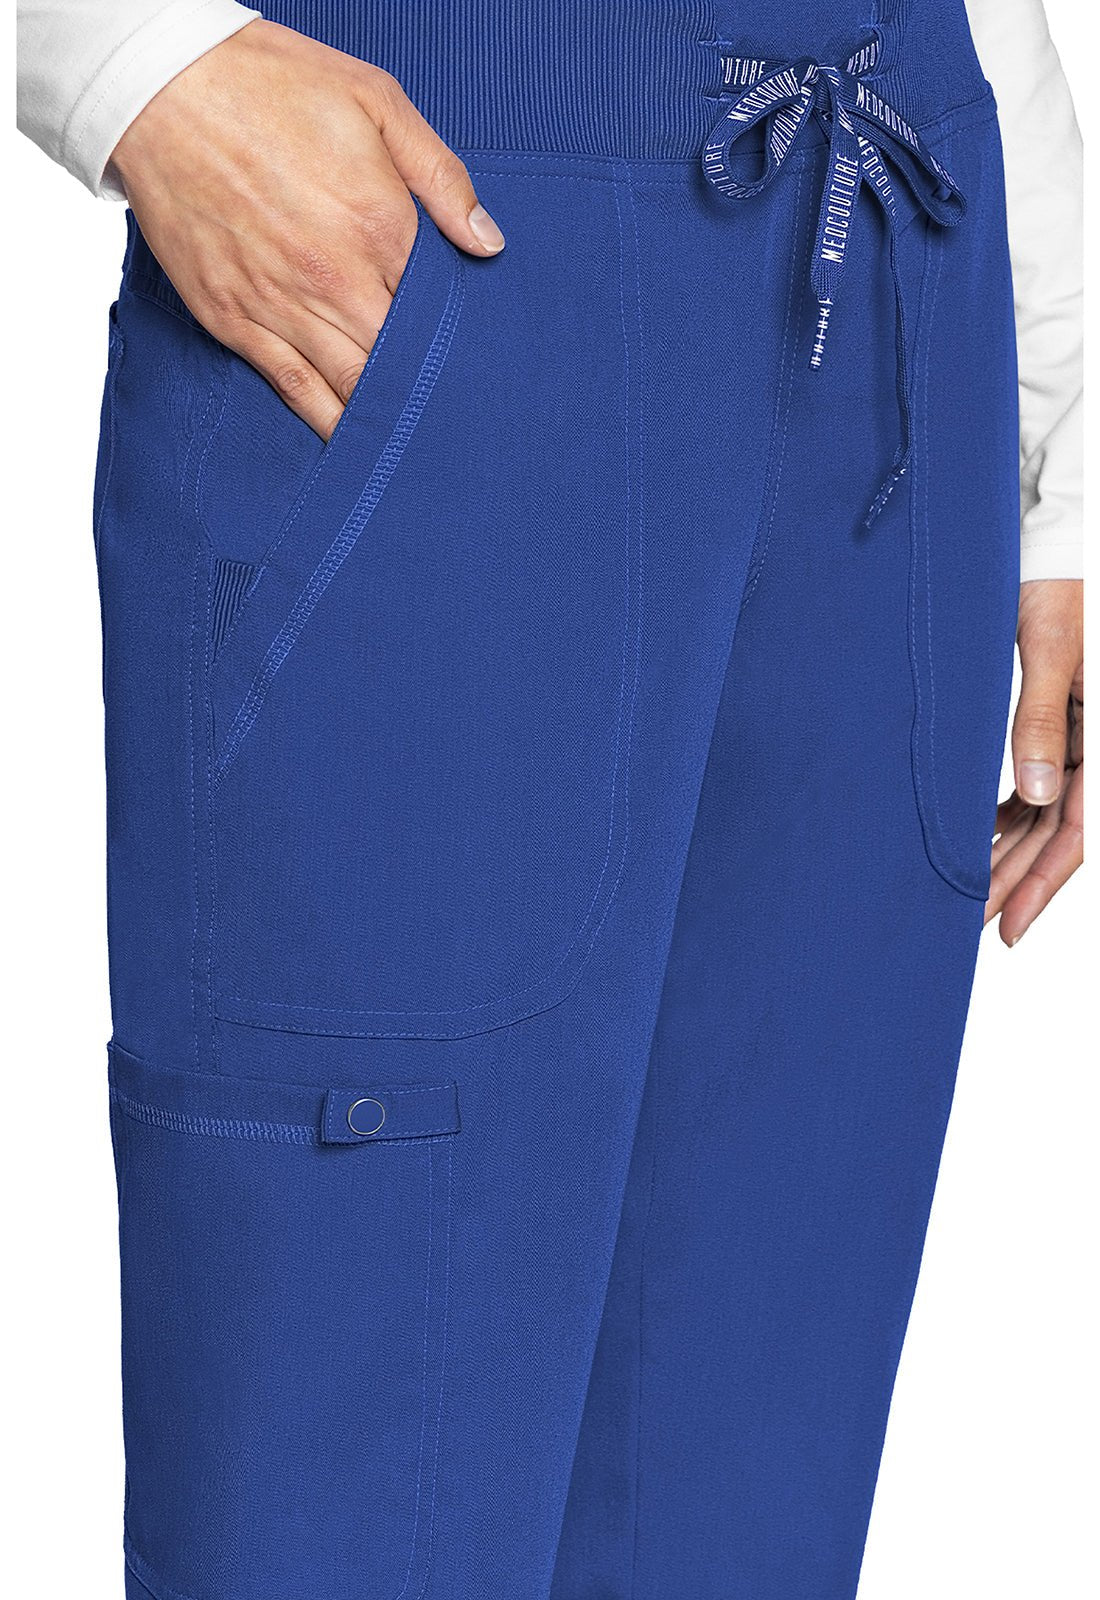 Med Couture Touch Jogger Yoga Scrub Pant MC7710 in Caribbean, Ciel, Galaxy, Hunter - Scrubs Select